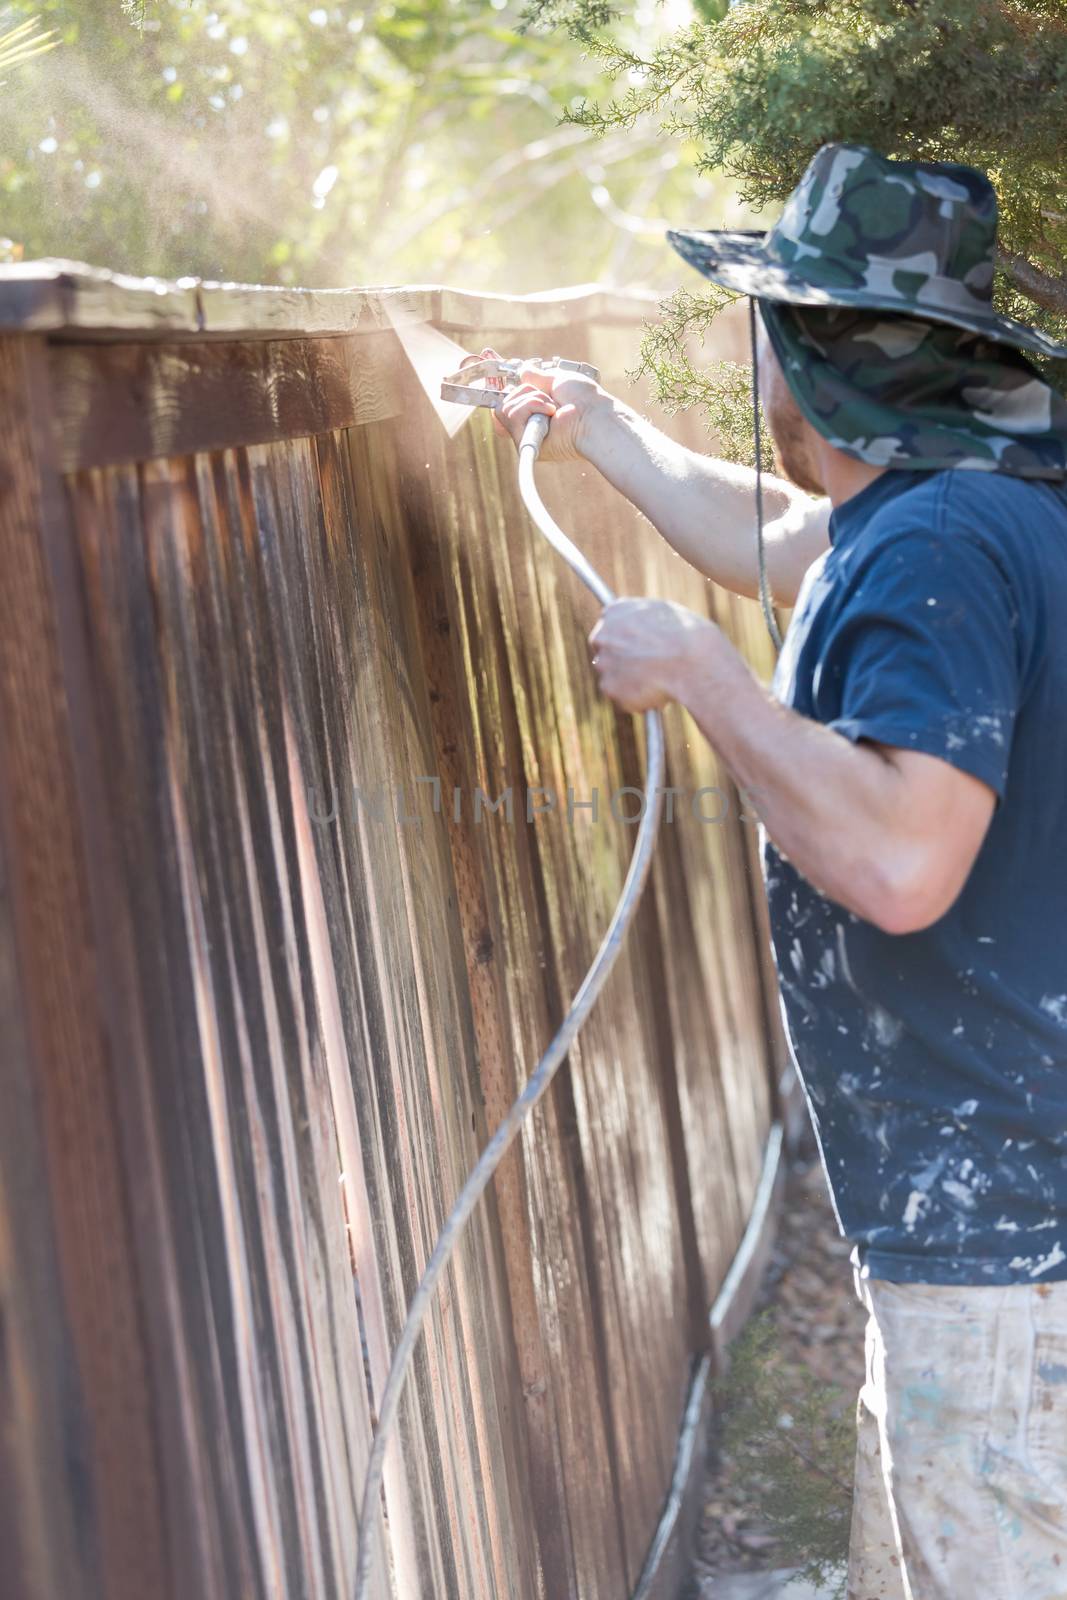 Professional Painter Spraying Yard Fence with Stain by Feverpitched